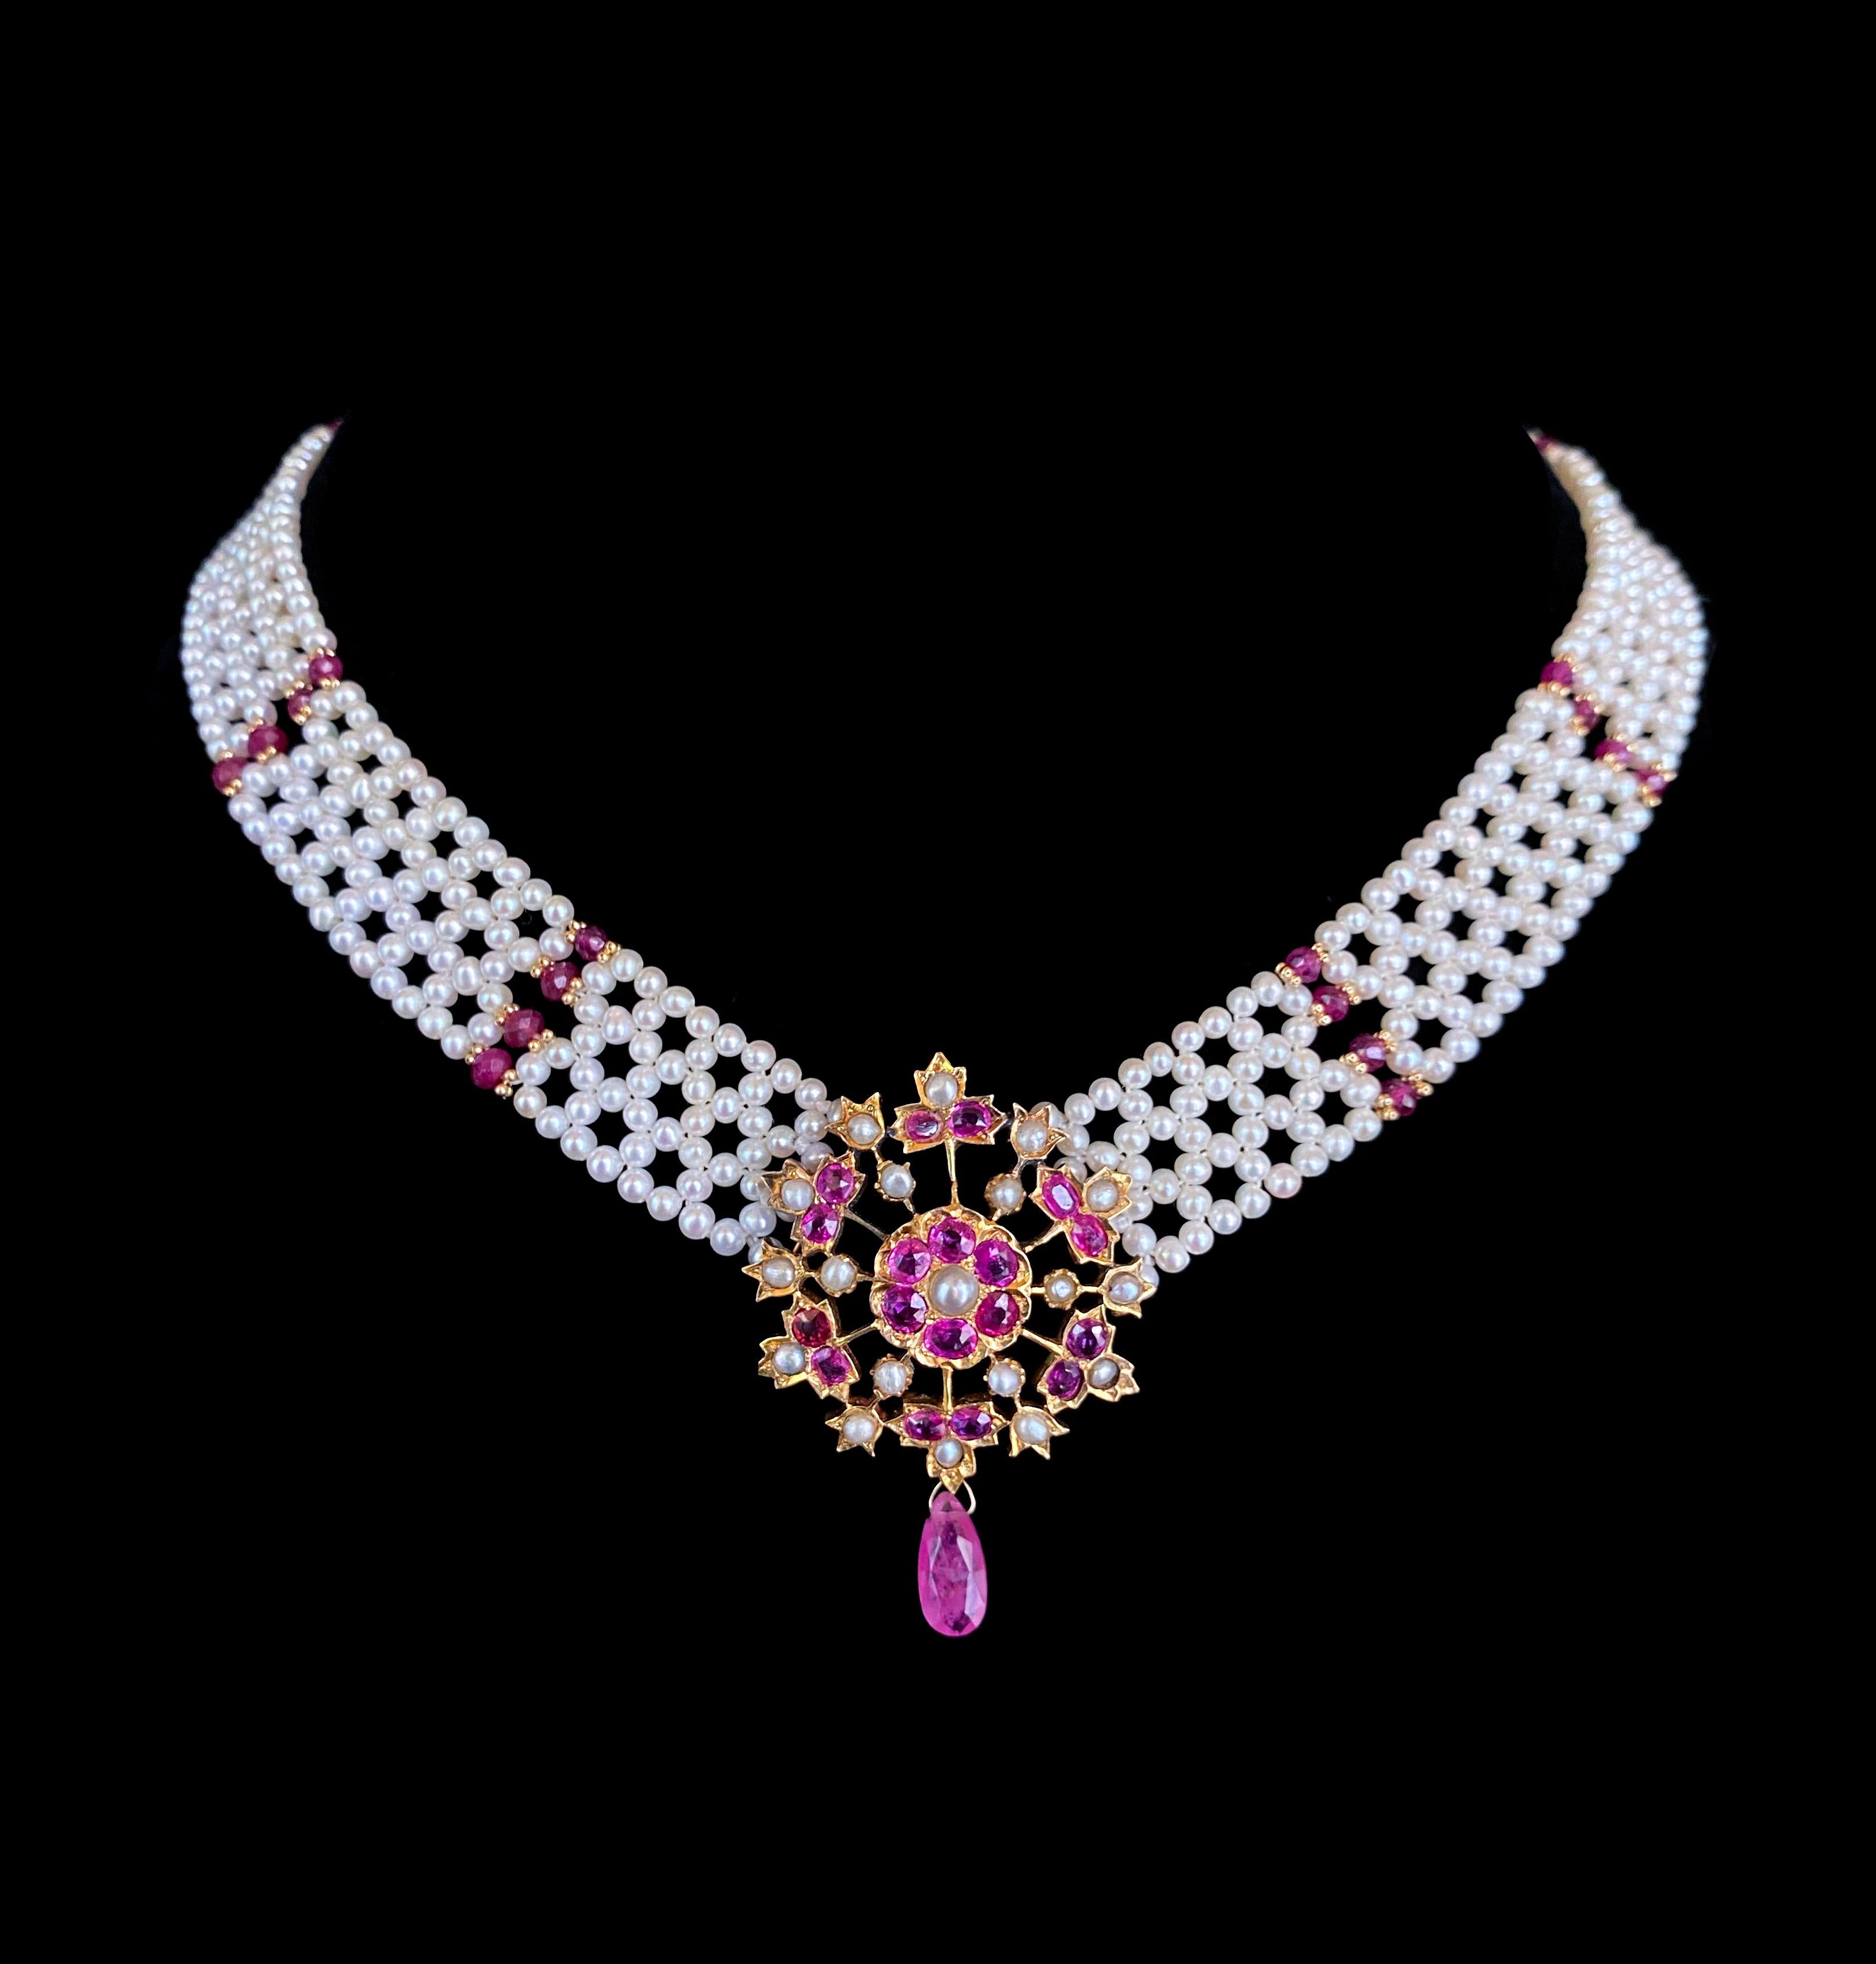 One of A Kind piece by Marina J. This necklace features a Vintage solid 18k Brooch reworked into a stunning Centerpiece. The Vintage Brooch contains all Original Antique Pearls and radiant Hot Pink Rubies all set into a Floral design, with a faceted